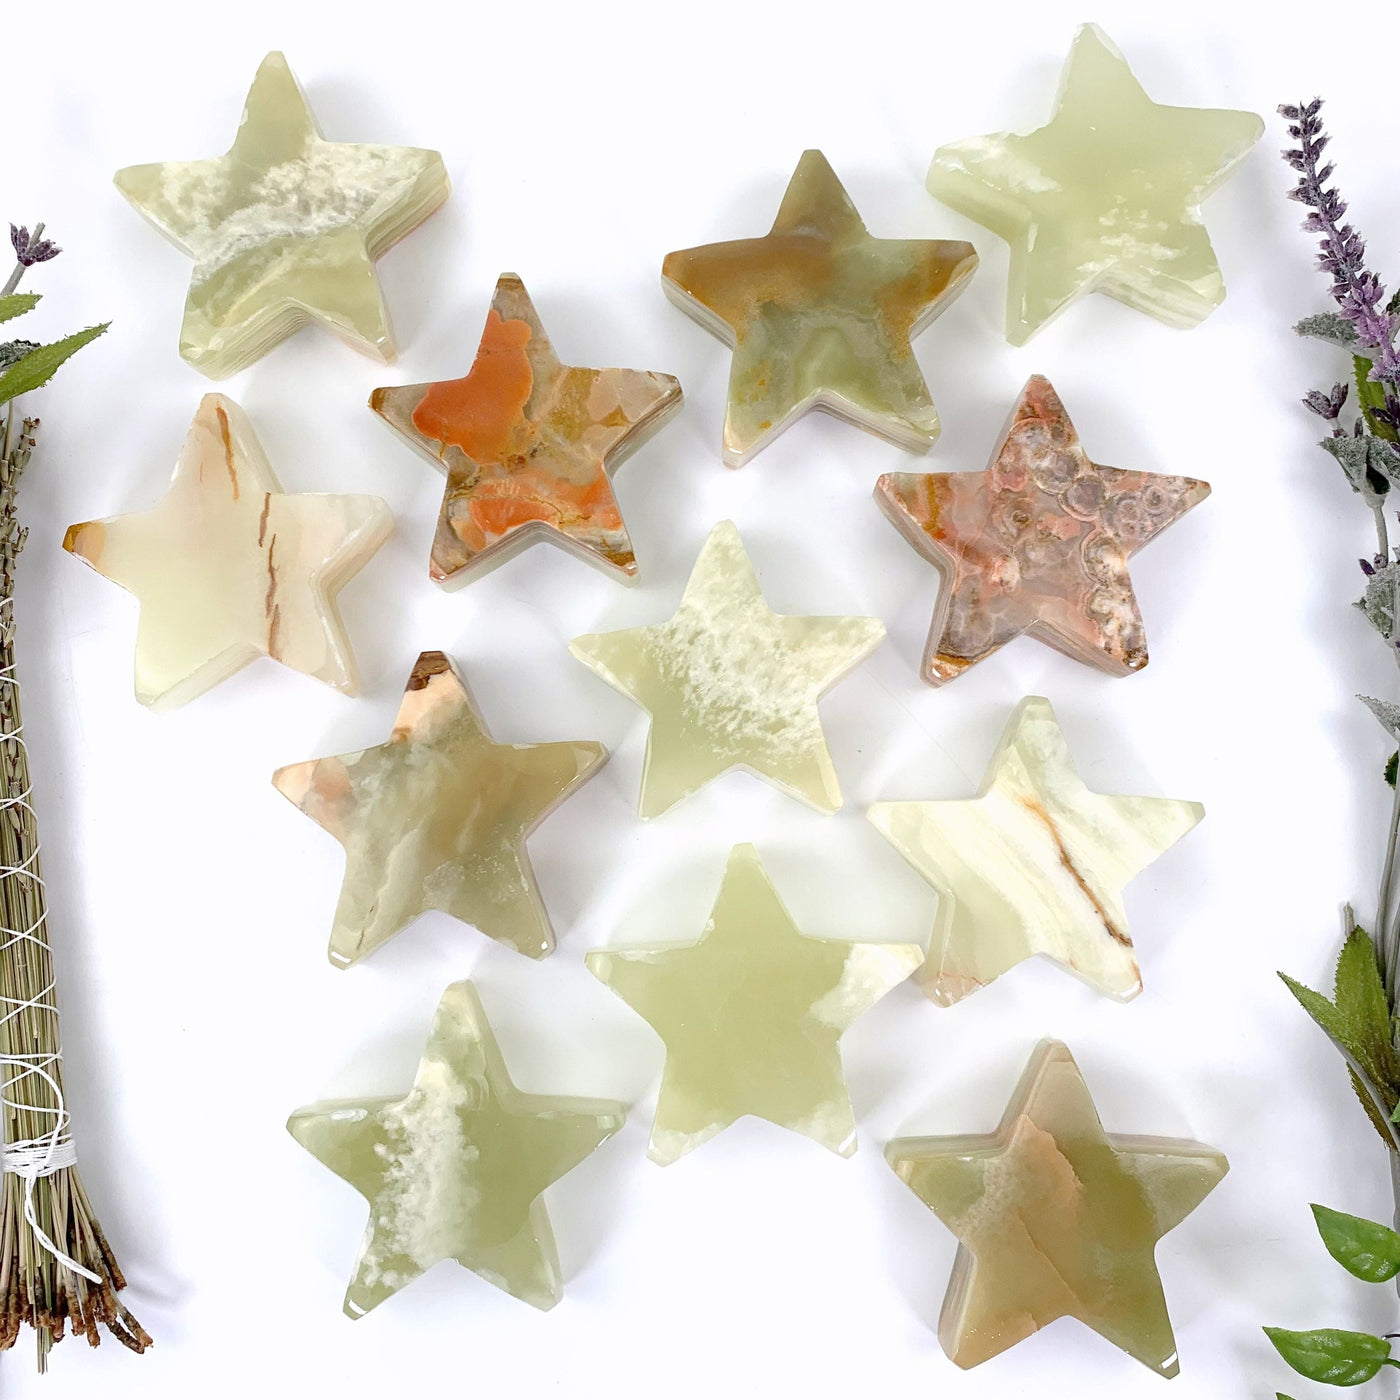 12 stars laid out on a white background to display color and characteristic variations